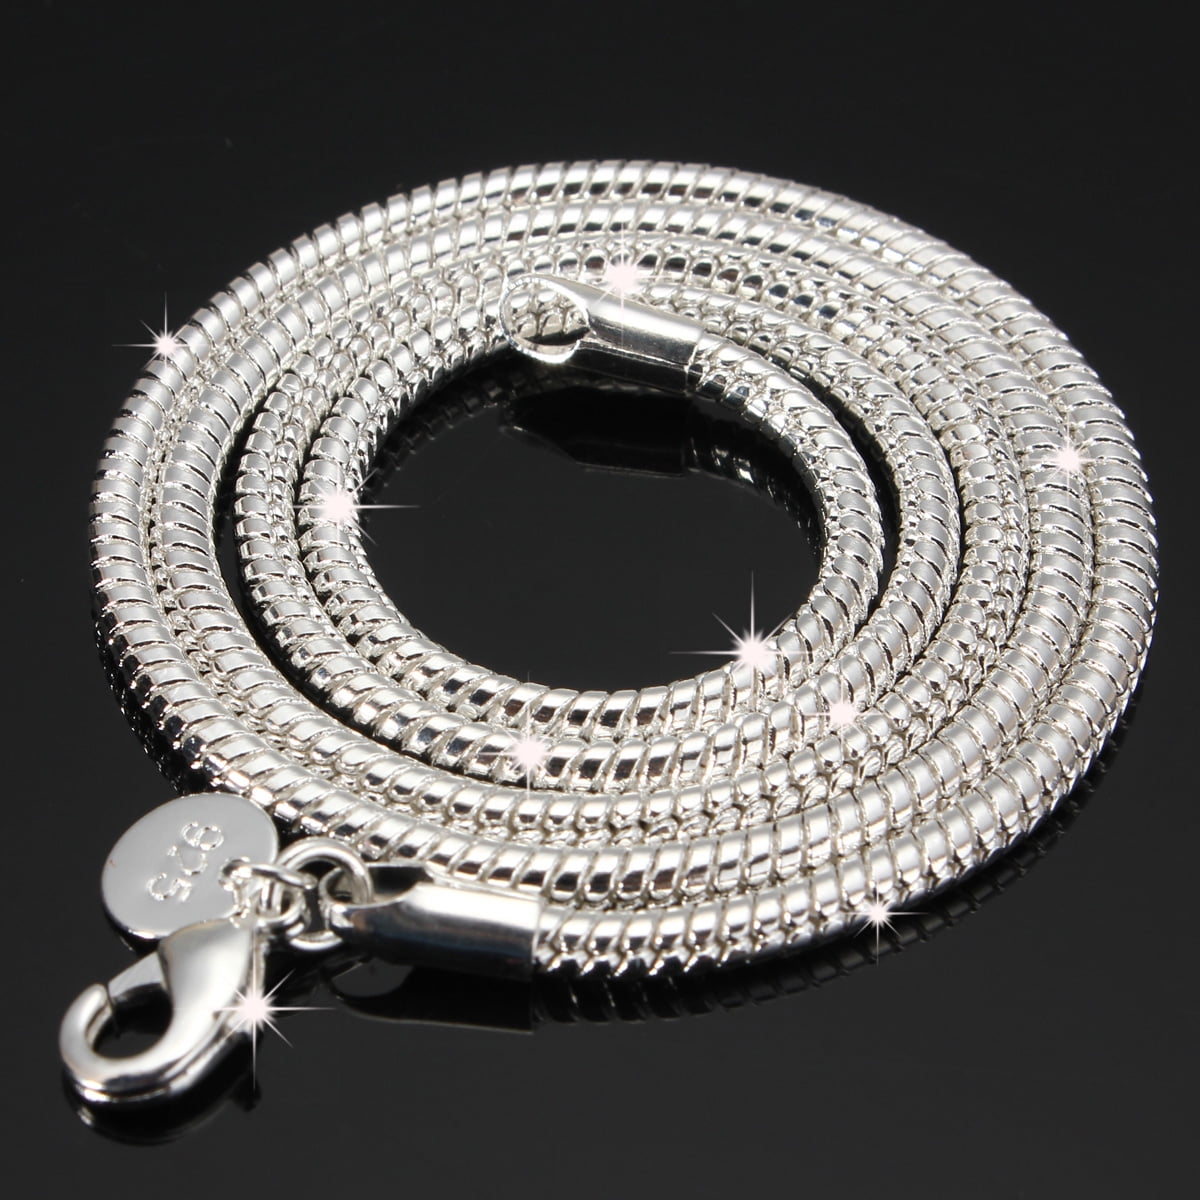 925 Silver Necklace Snake Chain 22" Brand New Free P&P